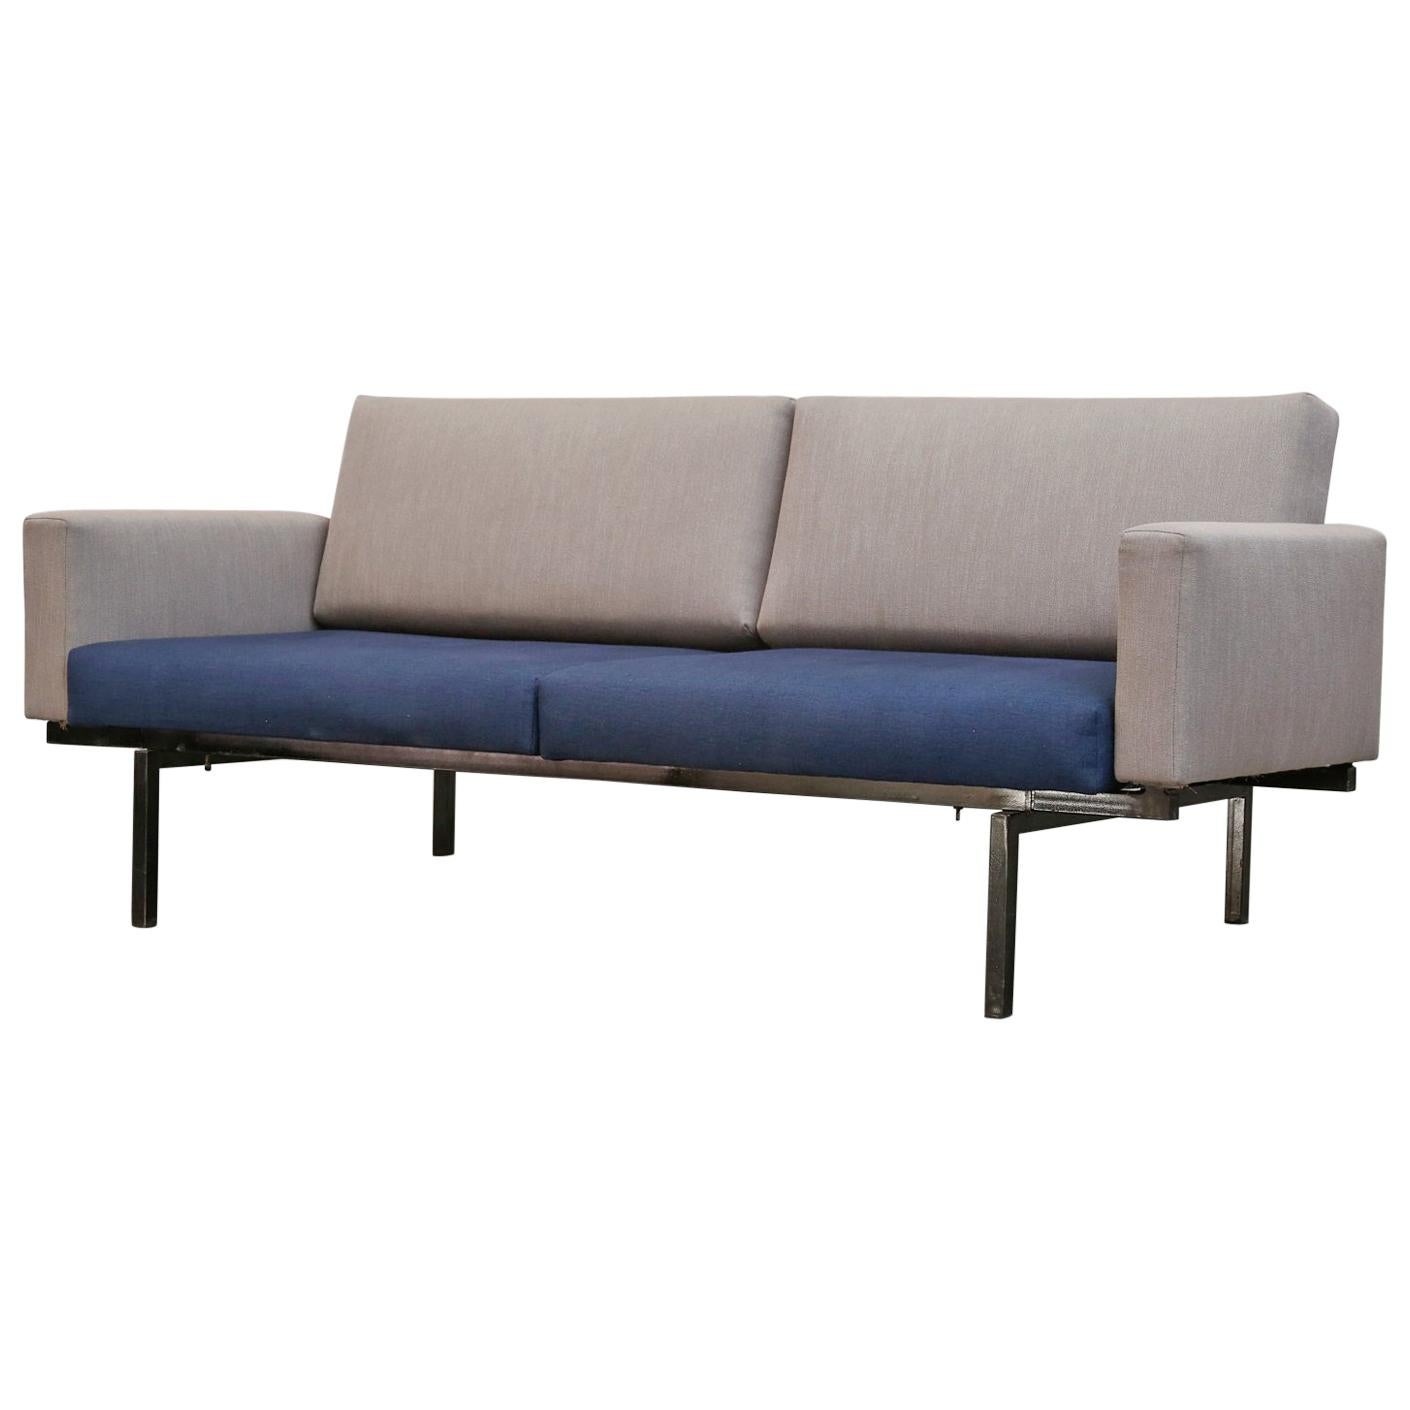 Coen de Vries Gray and Blue Sleeper Sofa from Pilastro For Sale